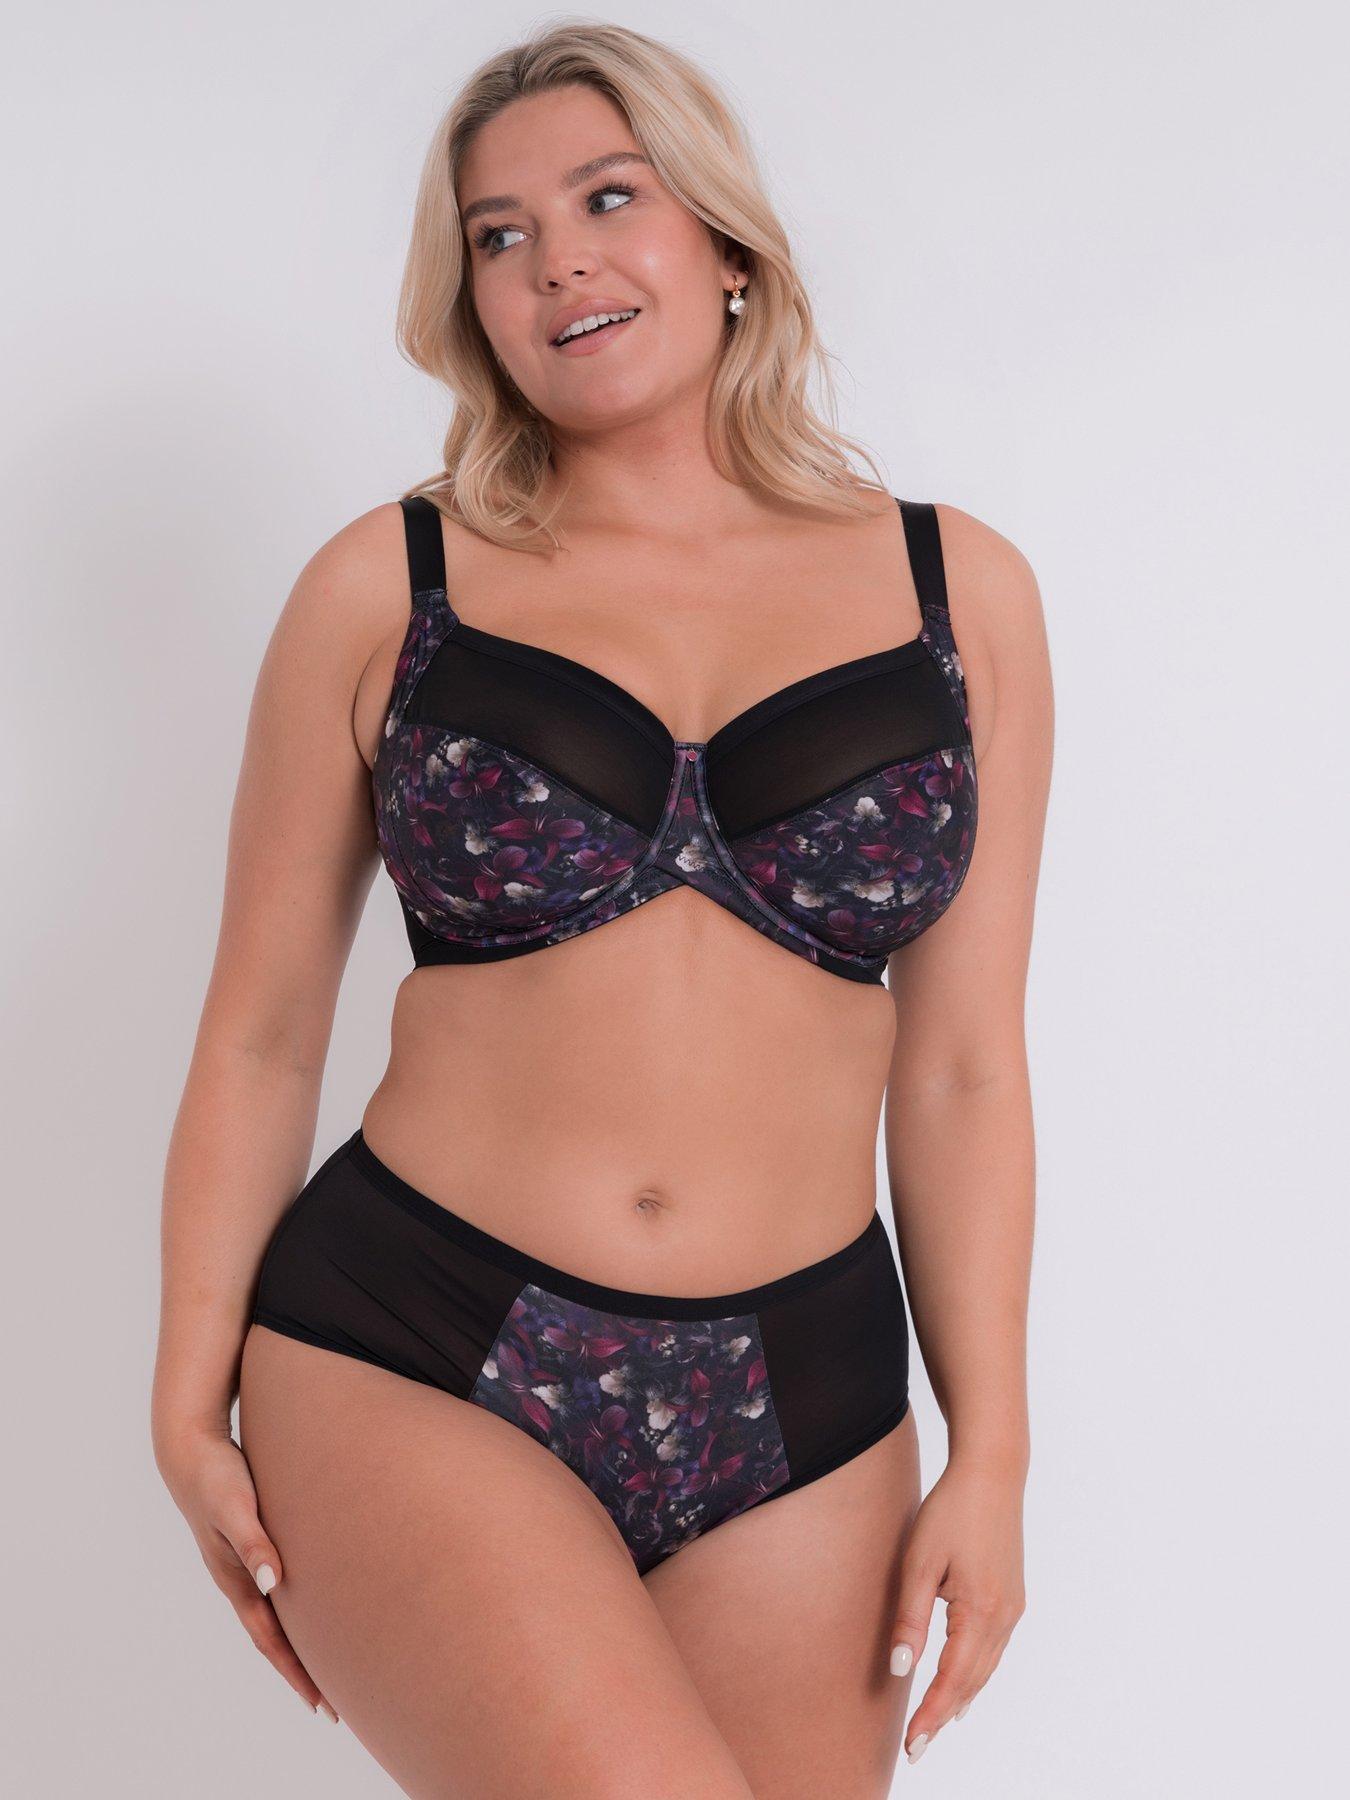 Luscious lingerie for all sizes – underwear as fabulous as outerwear -  FashioNZ